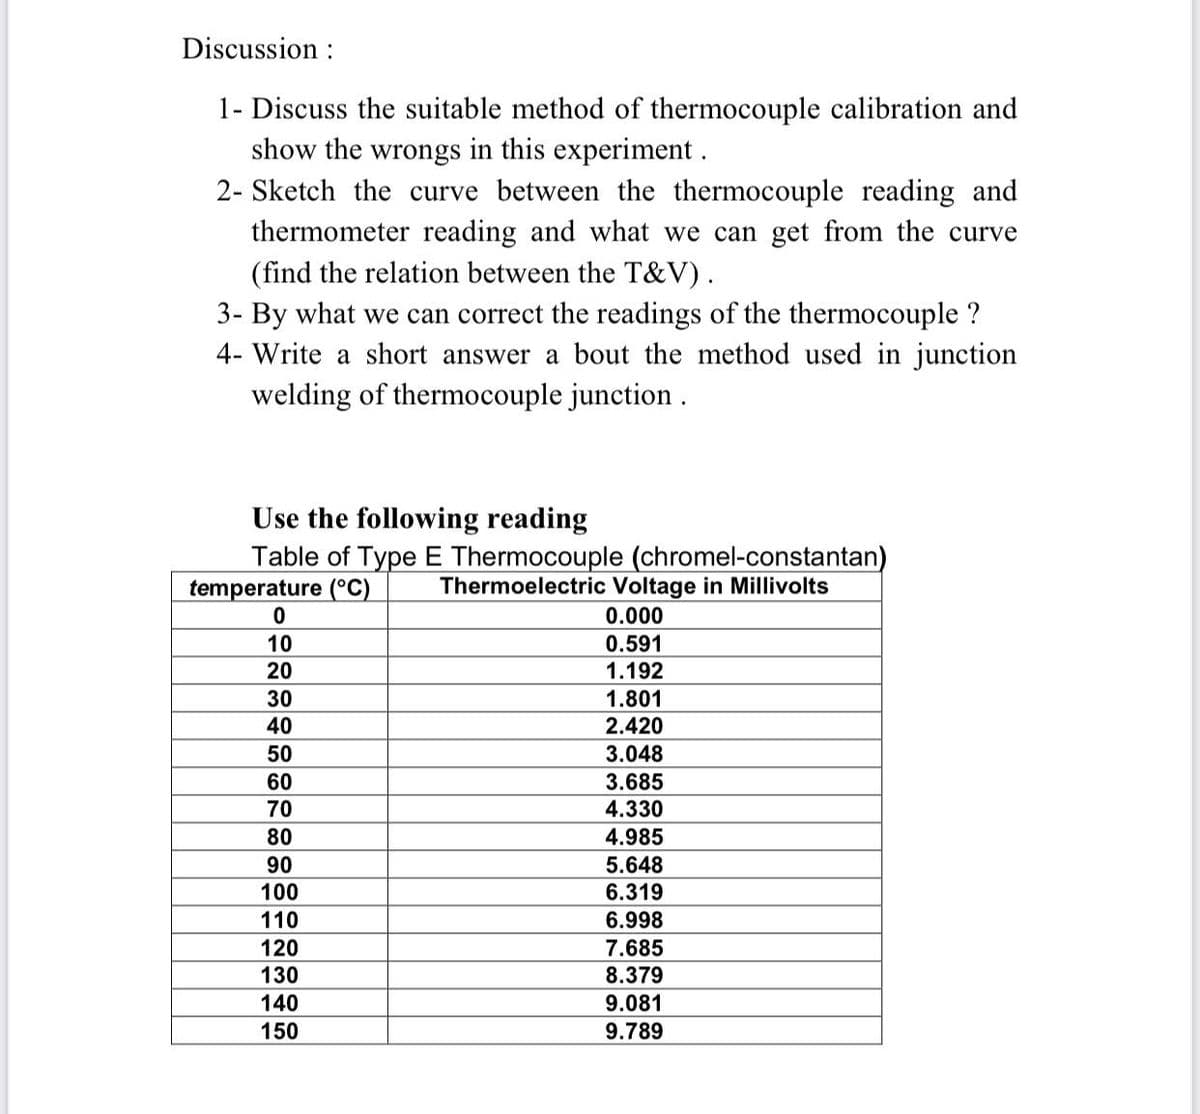 Discussion :
1- Discuss the suitable method of thermocouple calibration and
show the wrongs in this experiment .
2- Sketch the curve between the thermocouple reading and
thermometer reading and what we can get from the curve
(find the relation between the T&V).
3- By what we can correct the readings of the thermocouple ?
4- Write a short answer a bout the method used in junction
welding of thermocouple junction .
Use the following reading
Table of Type E Thermocouple (chromel-constantan)
temperature (°C)
Thermoelectric Voltage in Millivolts
0.000
10
0.591
20
1.192
30
1.801
40
2.420
50
3.048
60
3.685
70
4.330
80
4.985
5.648
6.319
90
100
110
6.998
120
7.685
130
8.379
9.081
9.789
140
150
